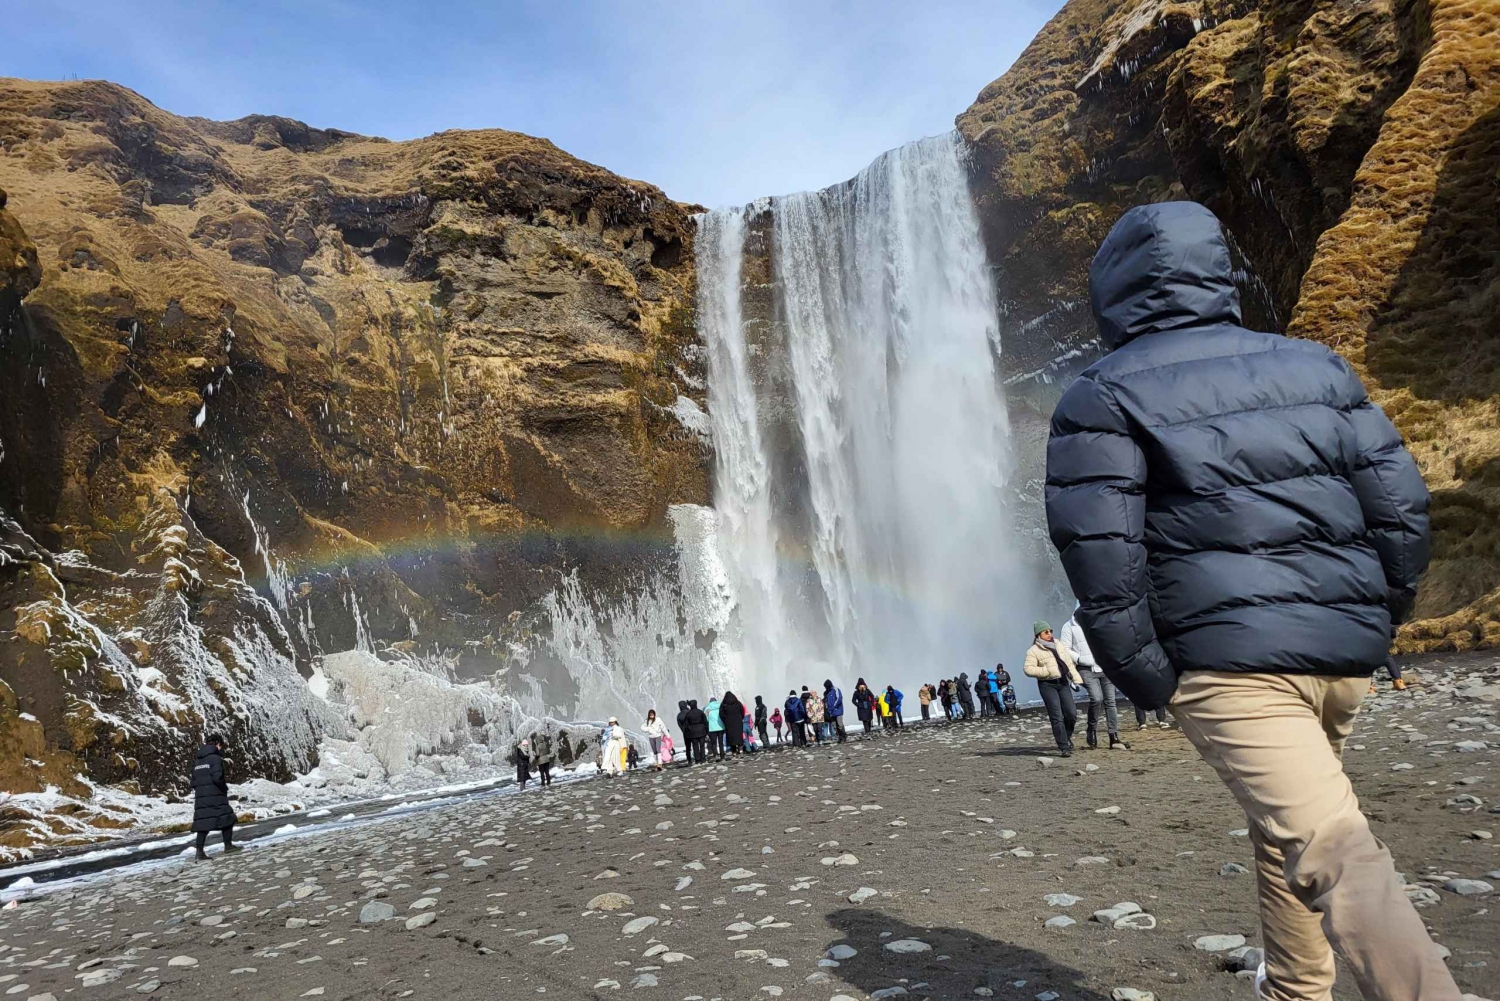 South Coast, Iceland: Day Private Tour